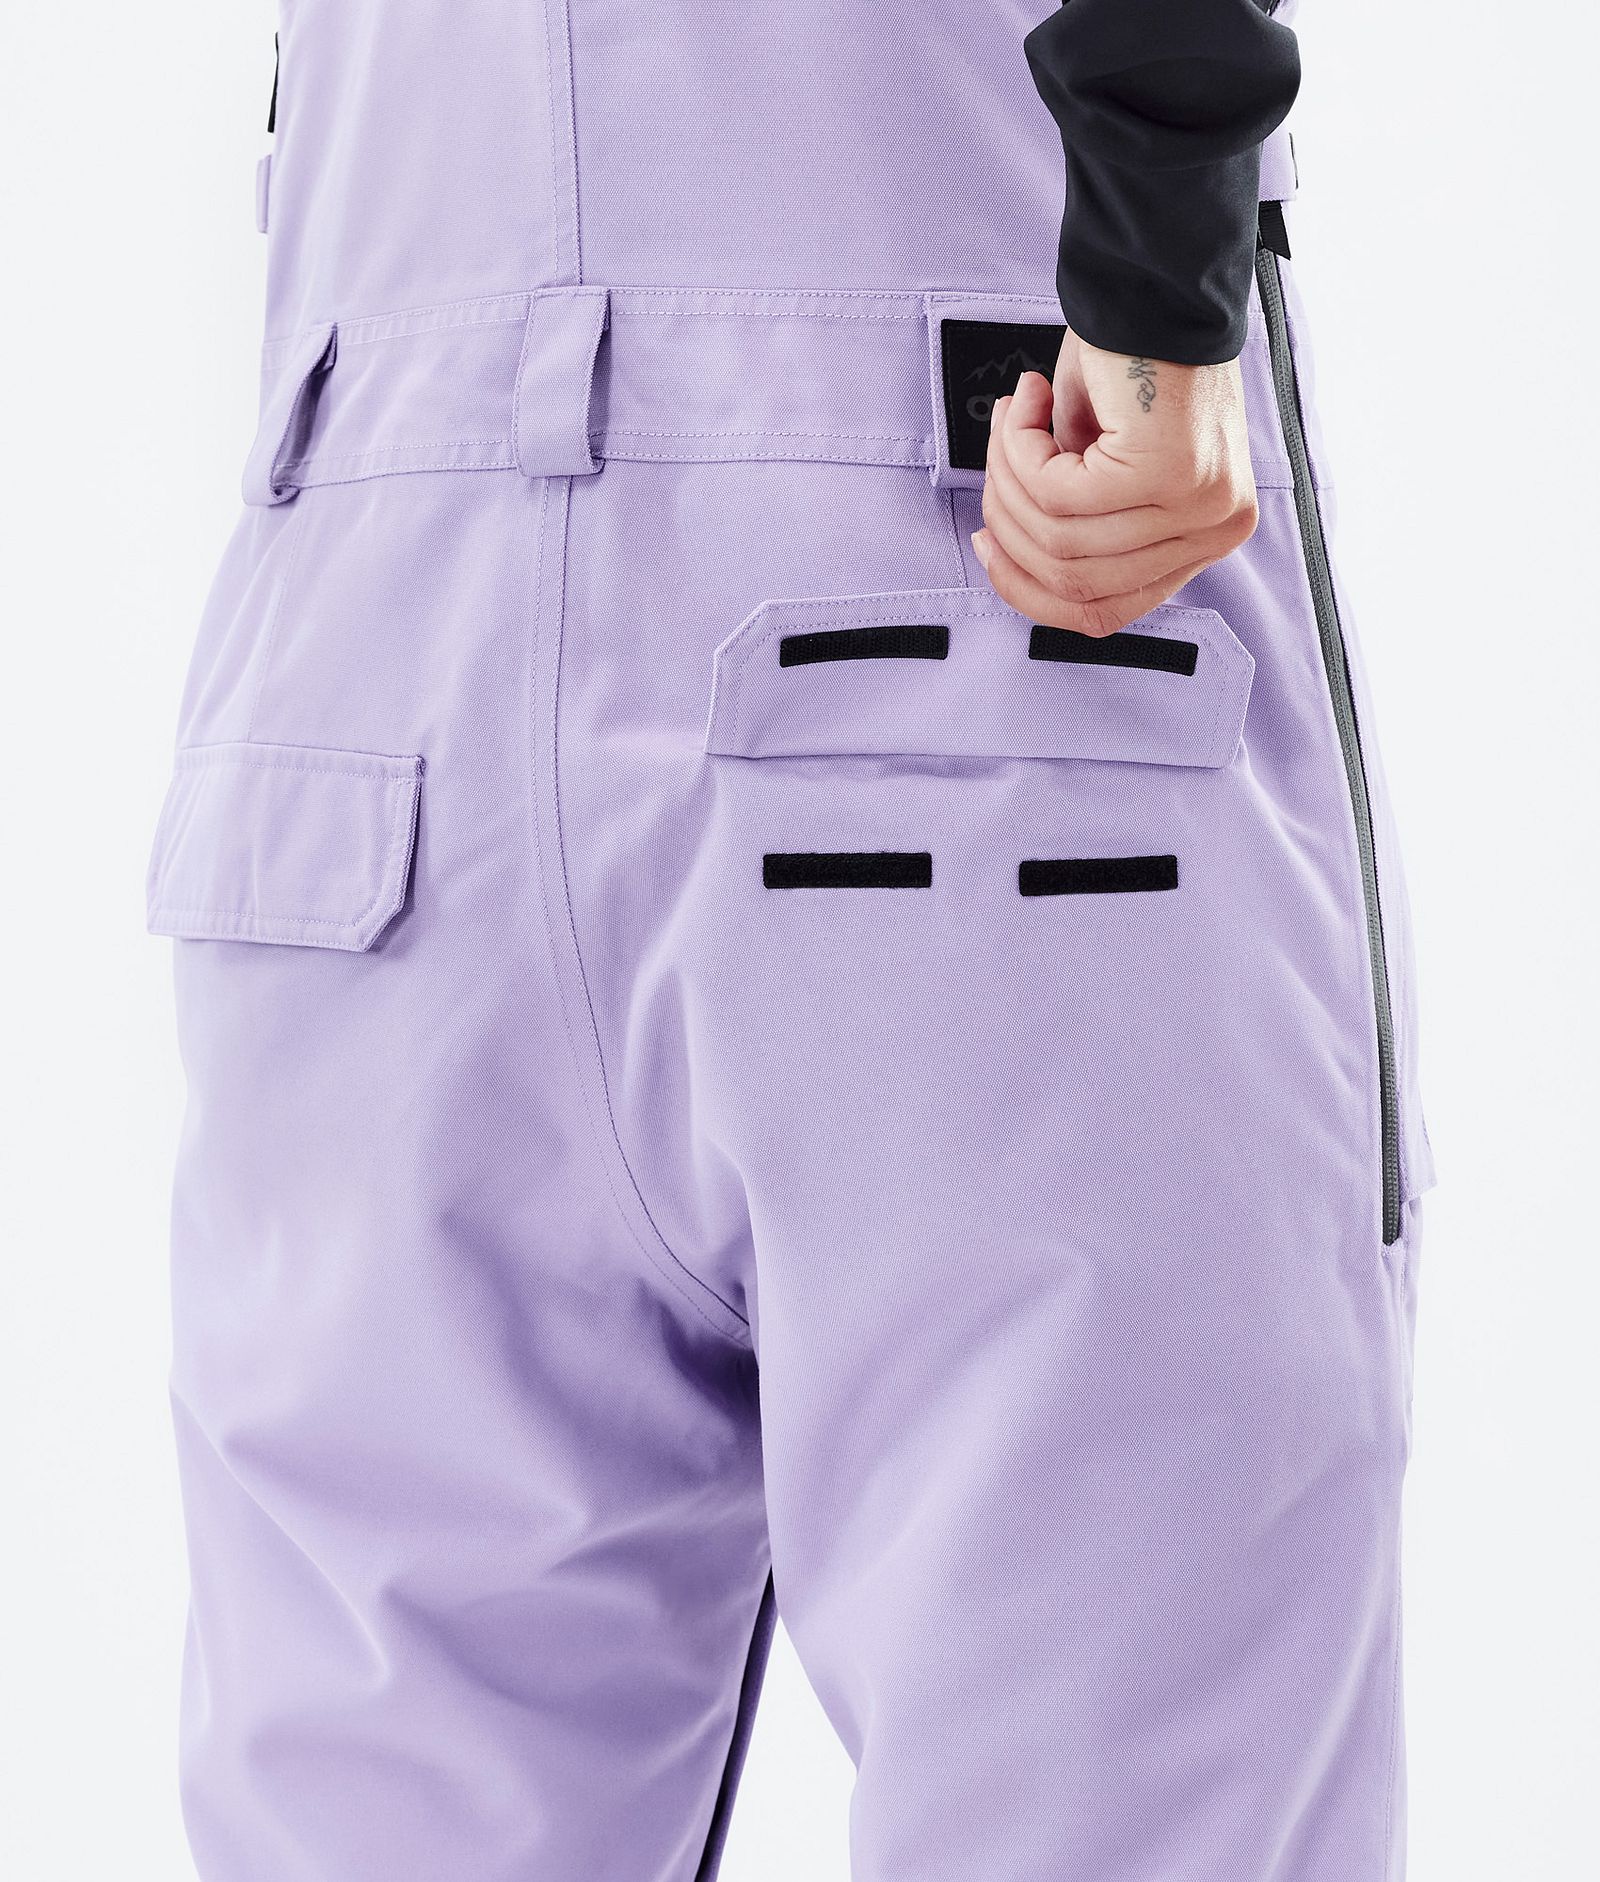 Notorious B.I.B W 2022 Snowboard Pants Women Faded Violet, Image 6 of 6